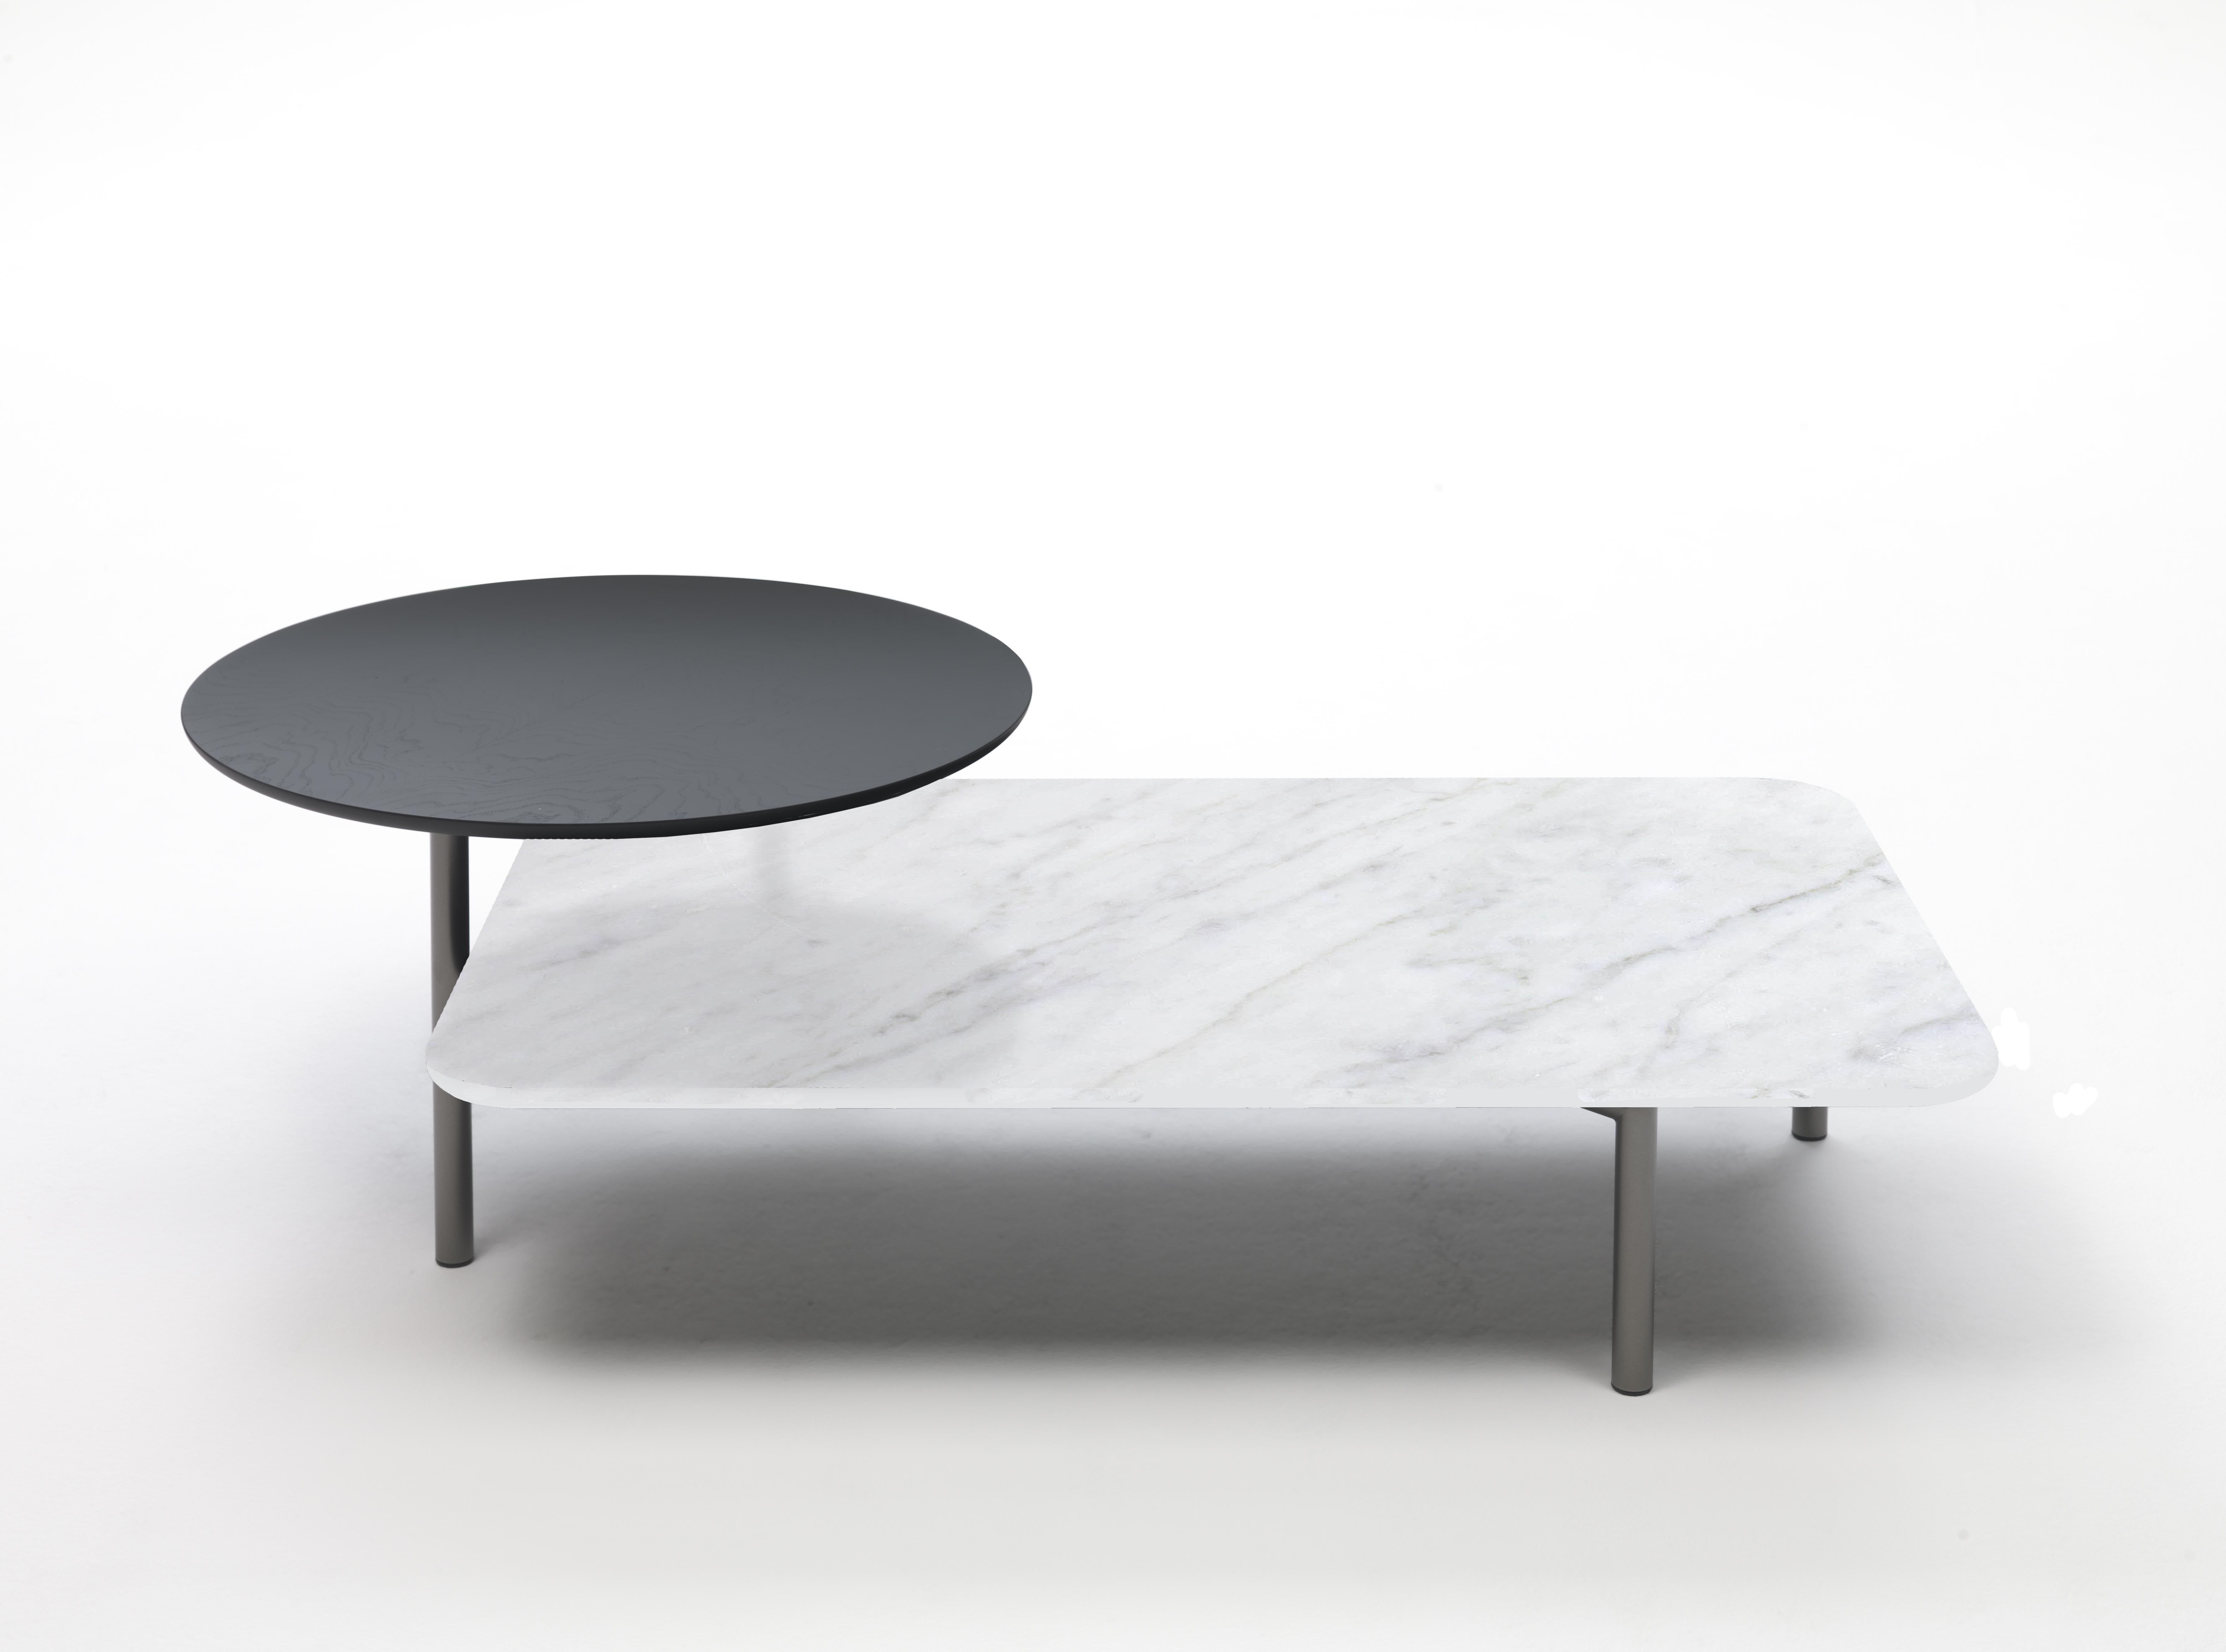 Carrara marble bitop coffee table by Rodolfo Dordoni.
Materials: Base in bronze lacquered metal. 2 versions of tops: black Marquina marble, white Carrara marble, or gray smoked glass
Technique: Lacquered metal, polished marble. 
Dimensions: 140 x